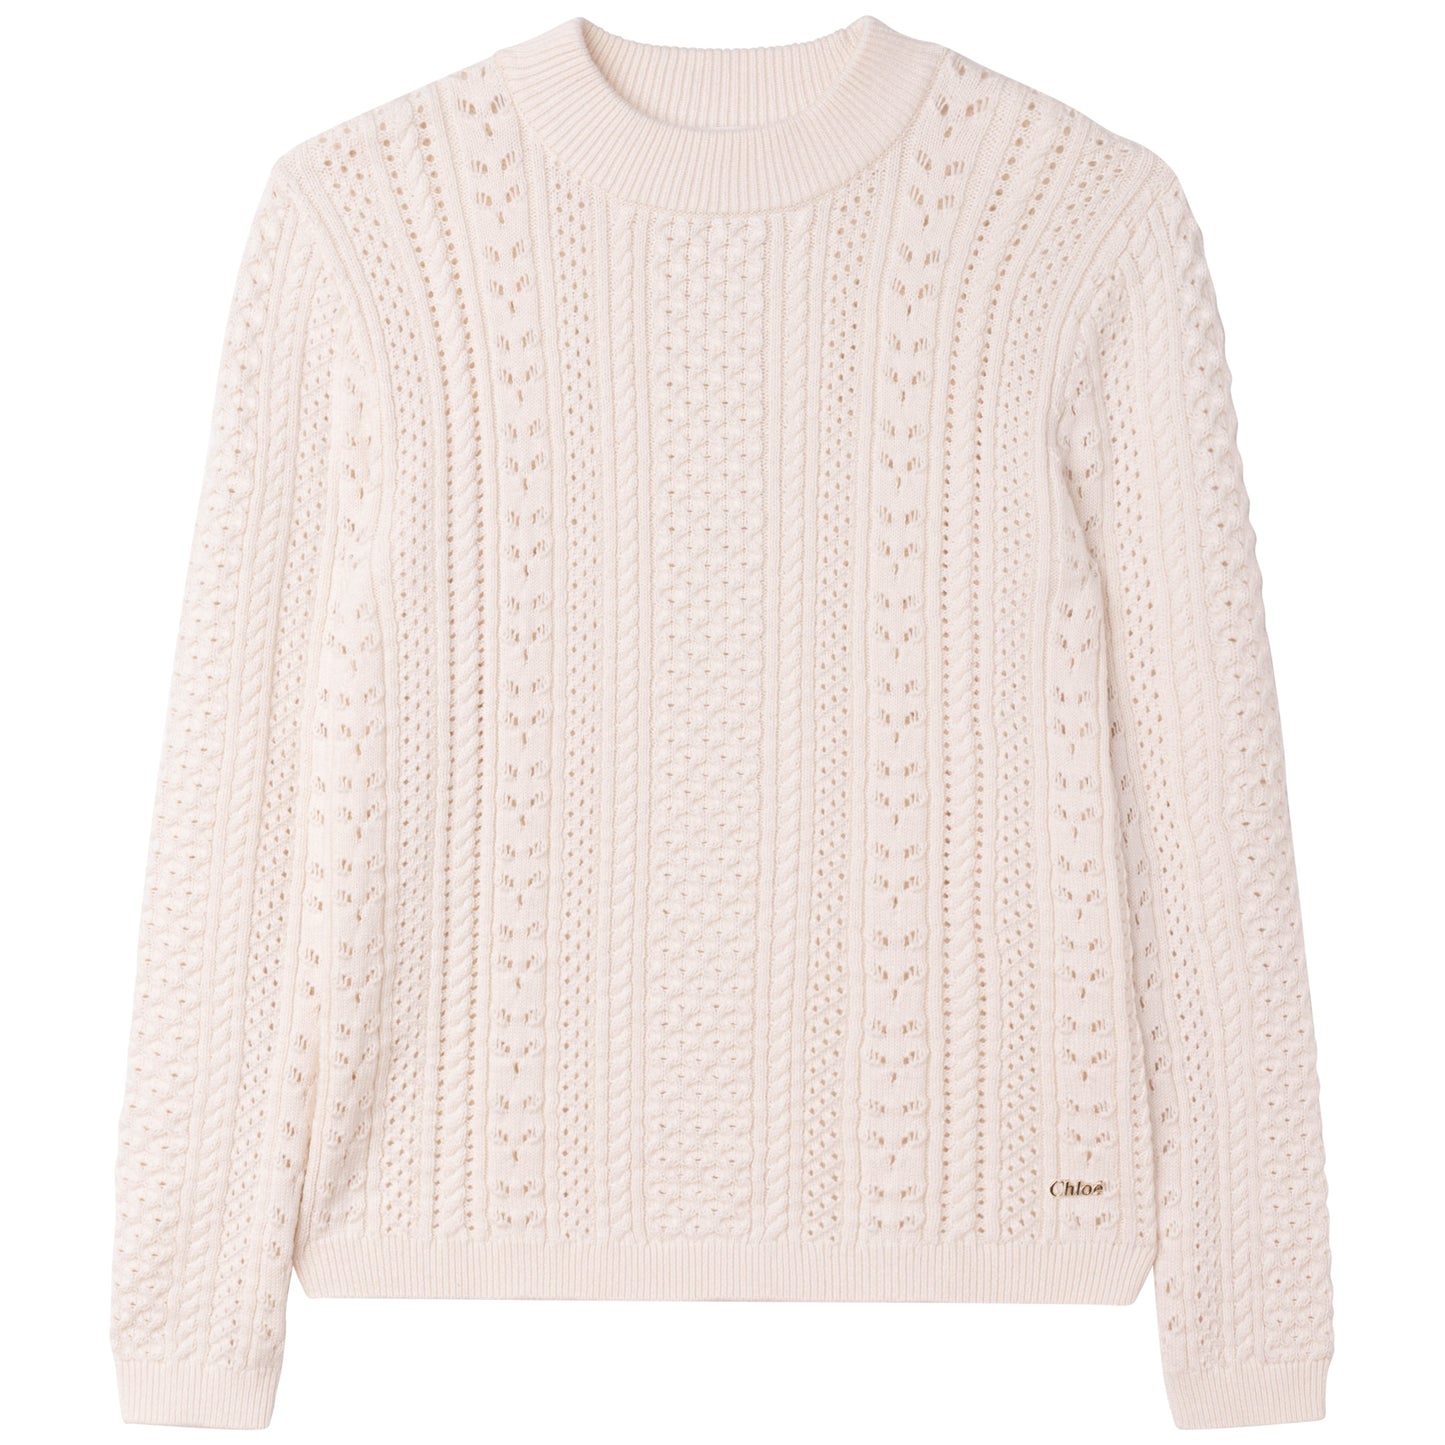 Chloe Knitted Sweater